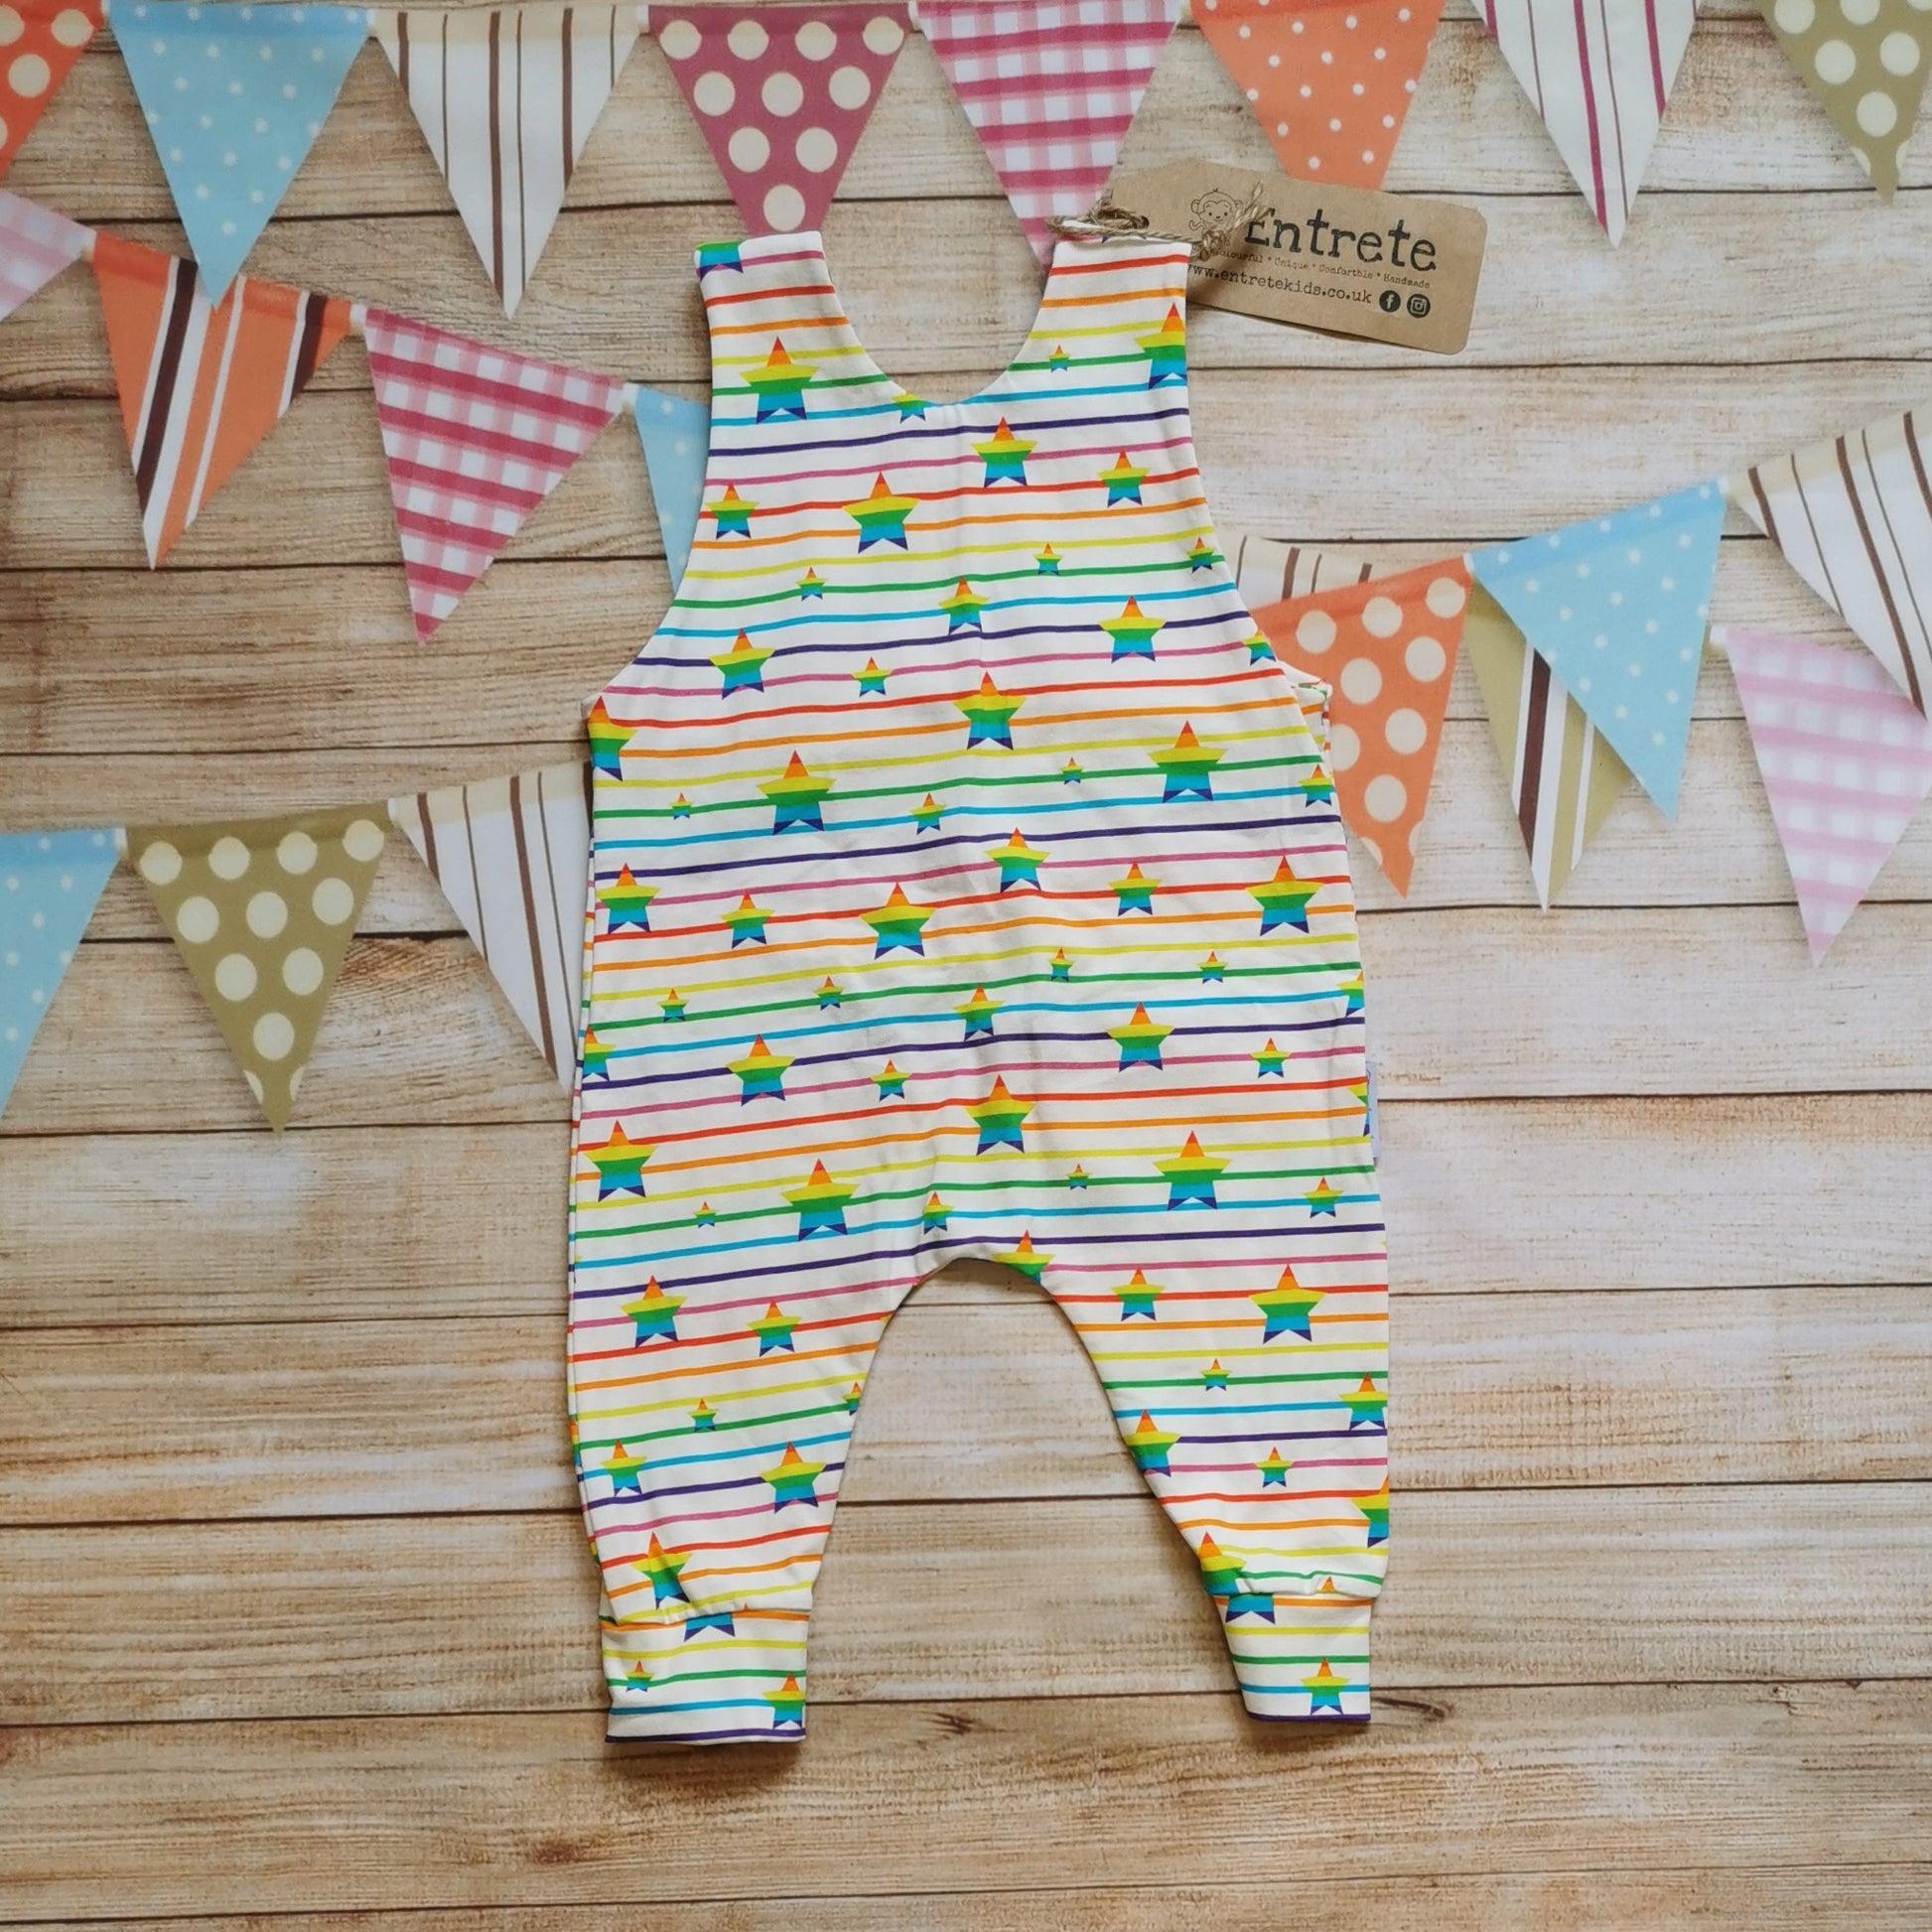 Rear of Child & Babies sleeveless romper, handmade using rainbow stars cotton jersey. Featuring shoulder popper entry.